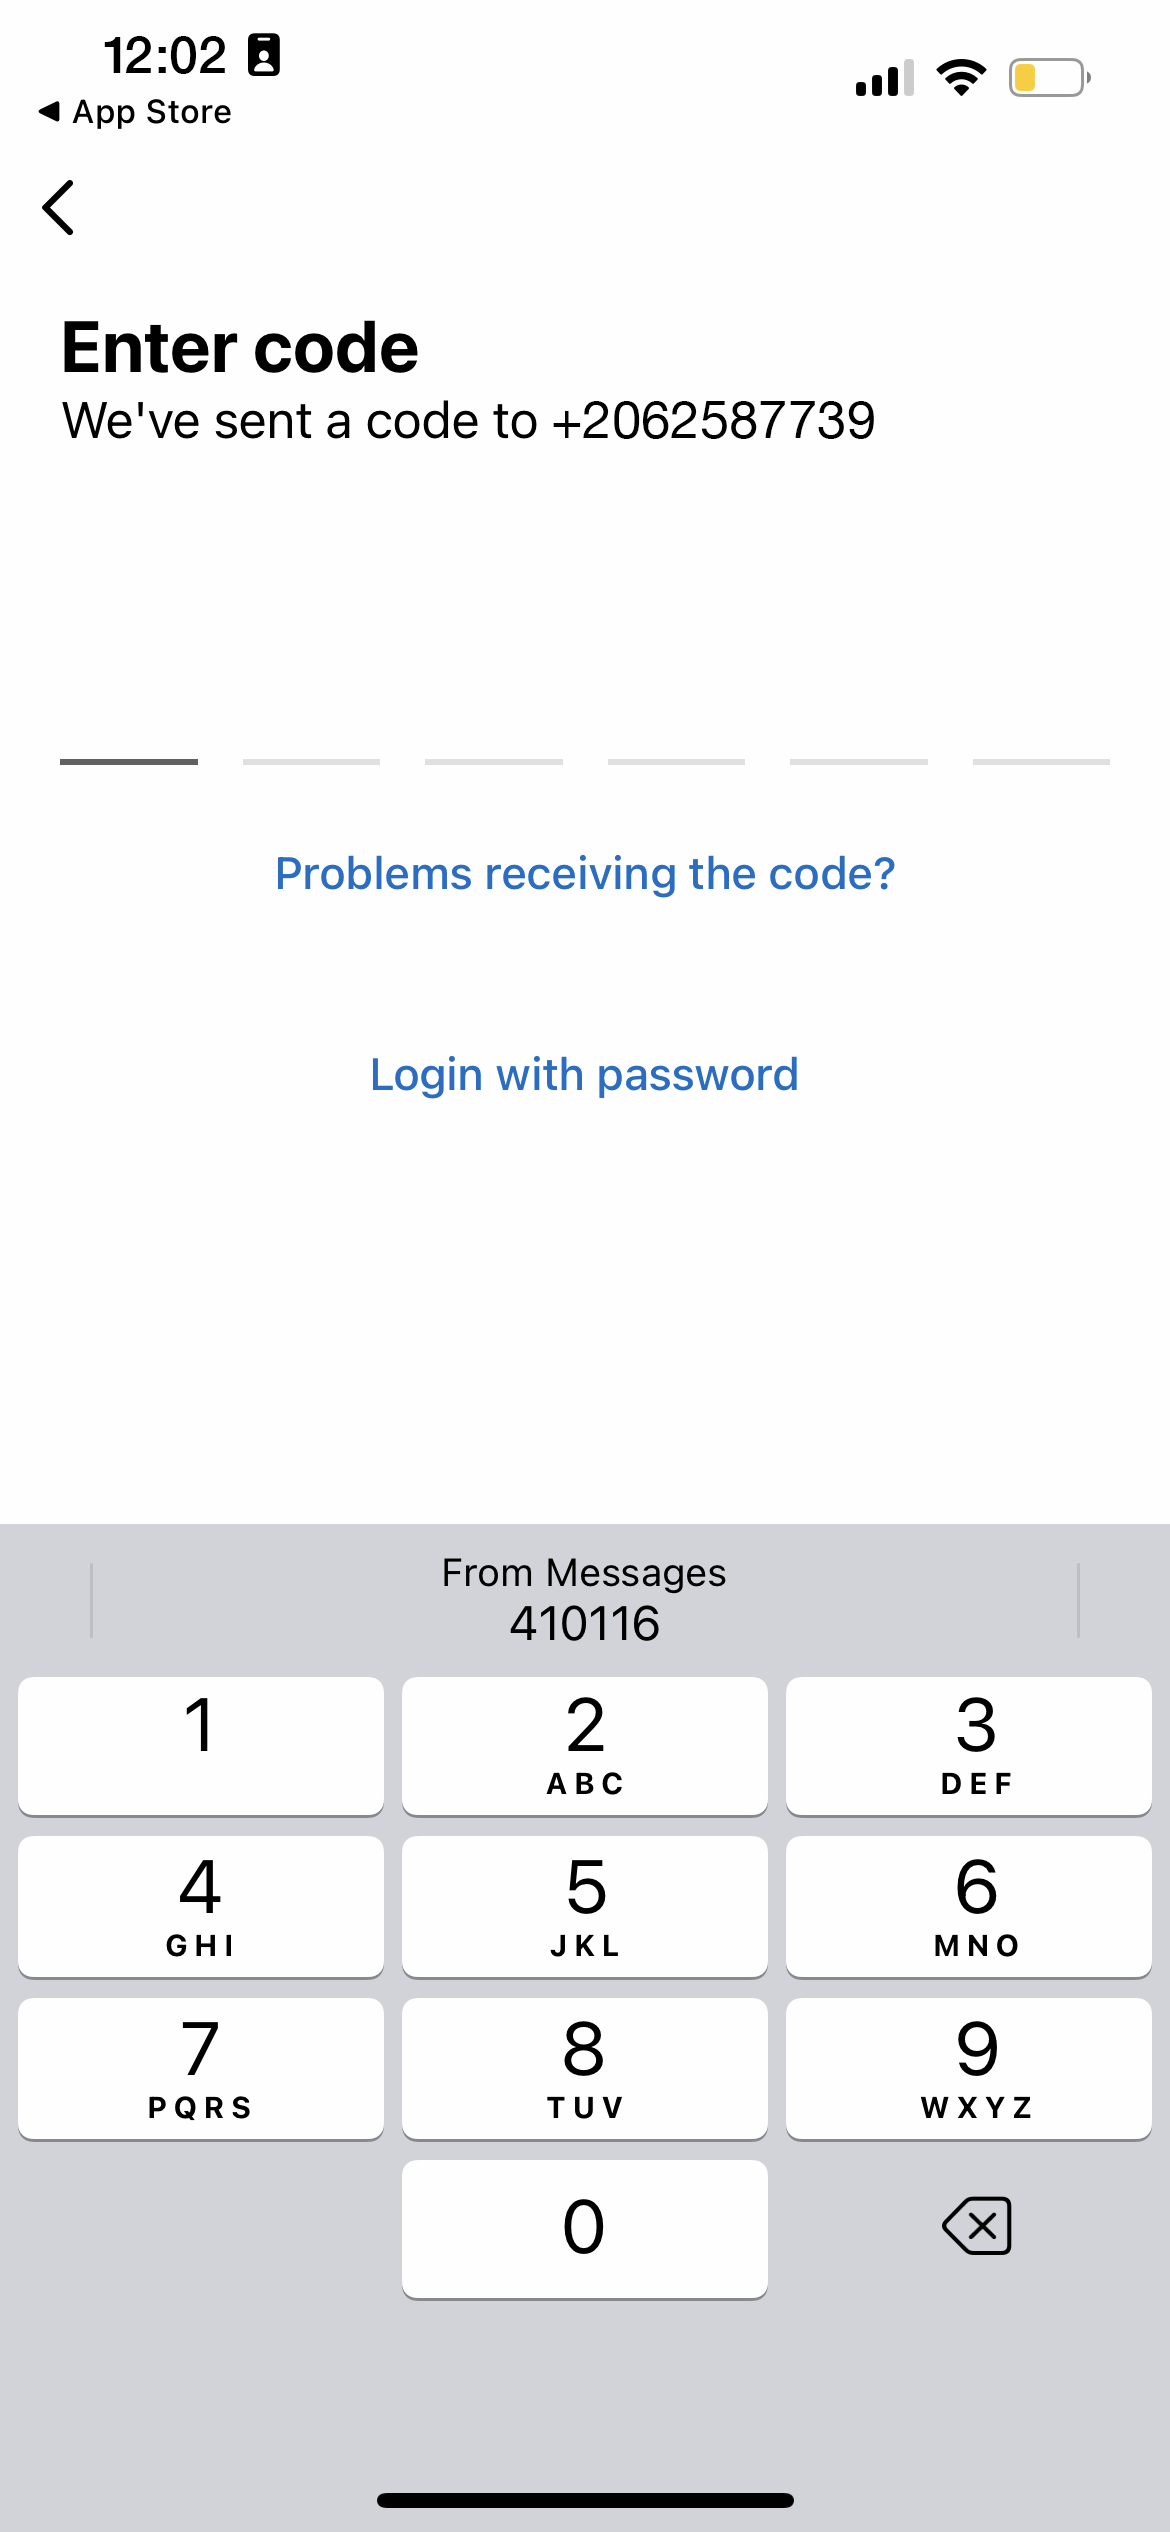 Image of a smartphone screenshot showing the Metro Flex app with a prompt to enter a code sent to your phone number.